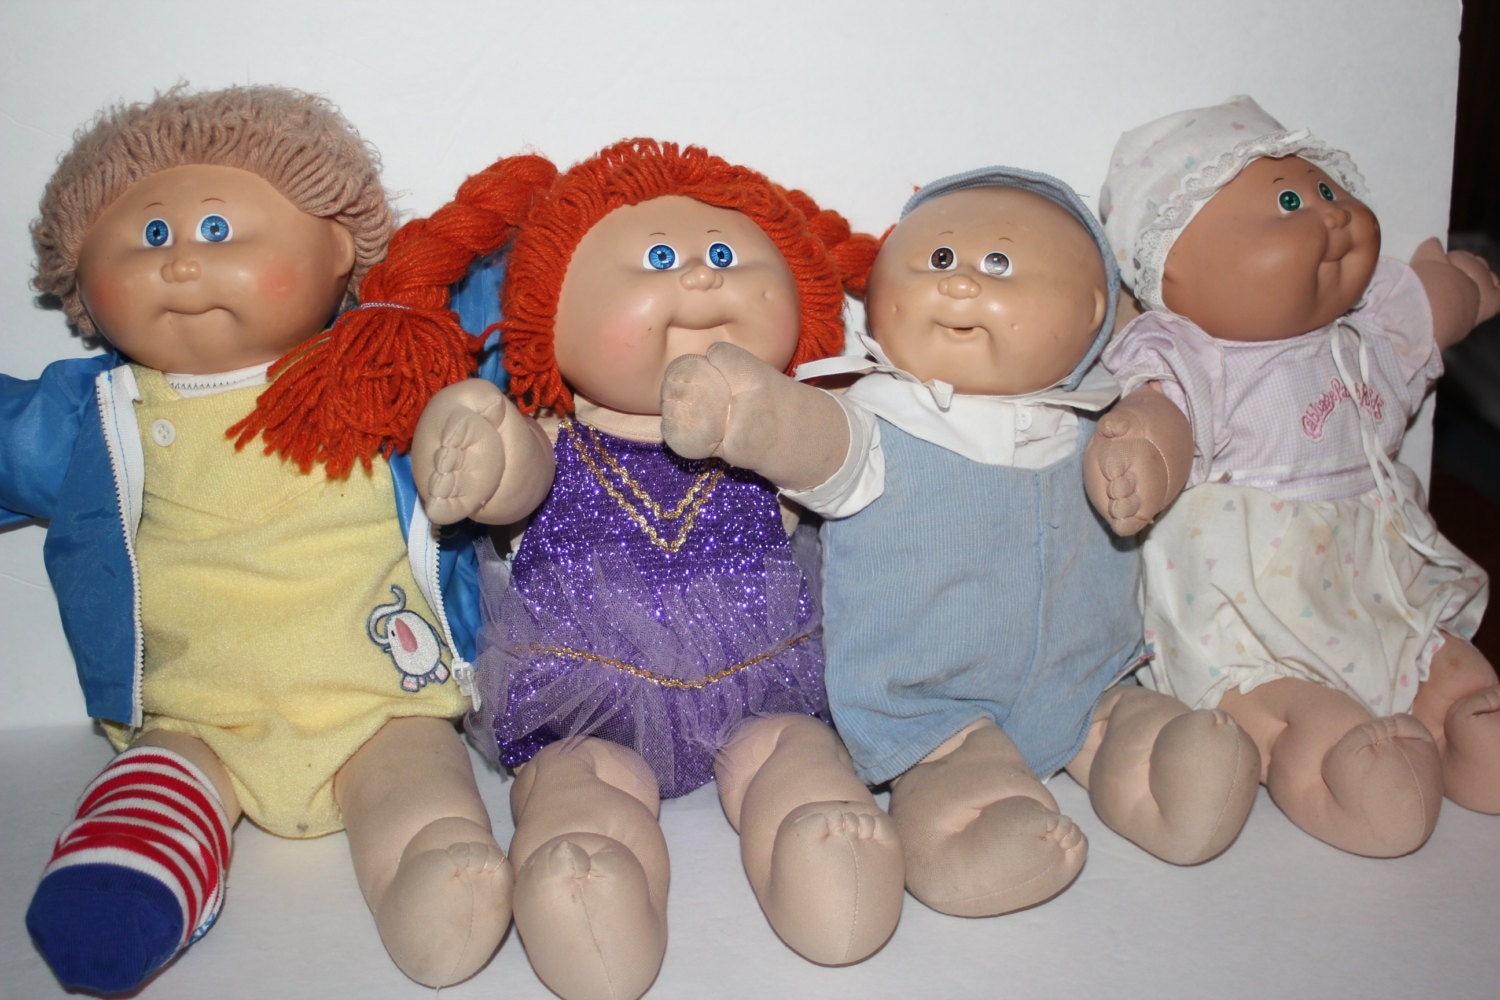 How Much Is A 1978 Cabbage Patch Doll Worth